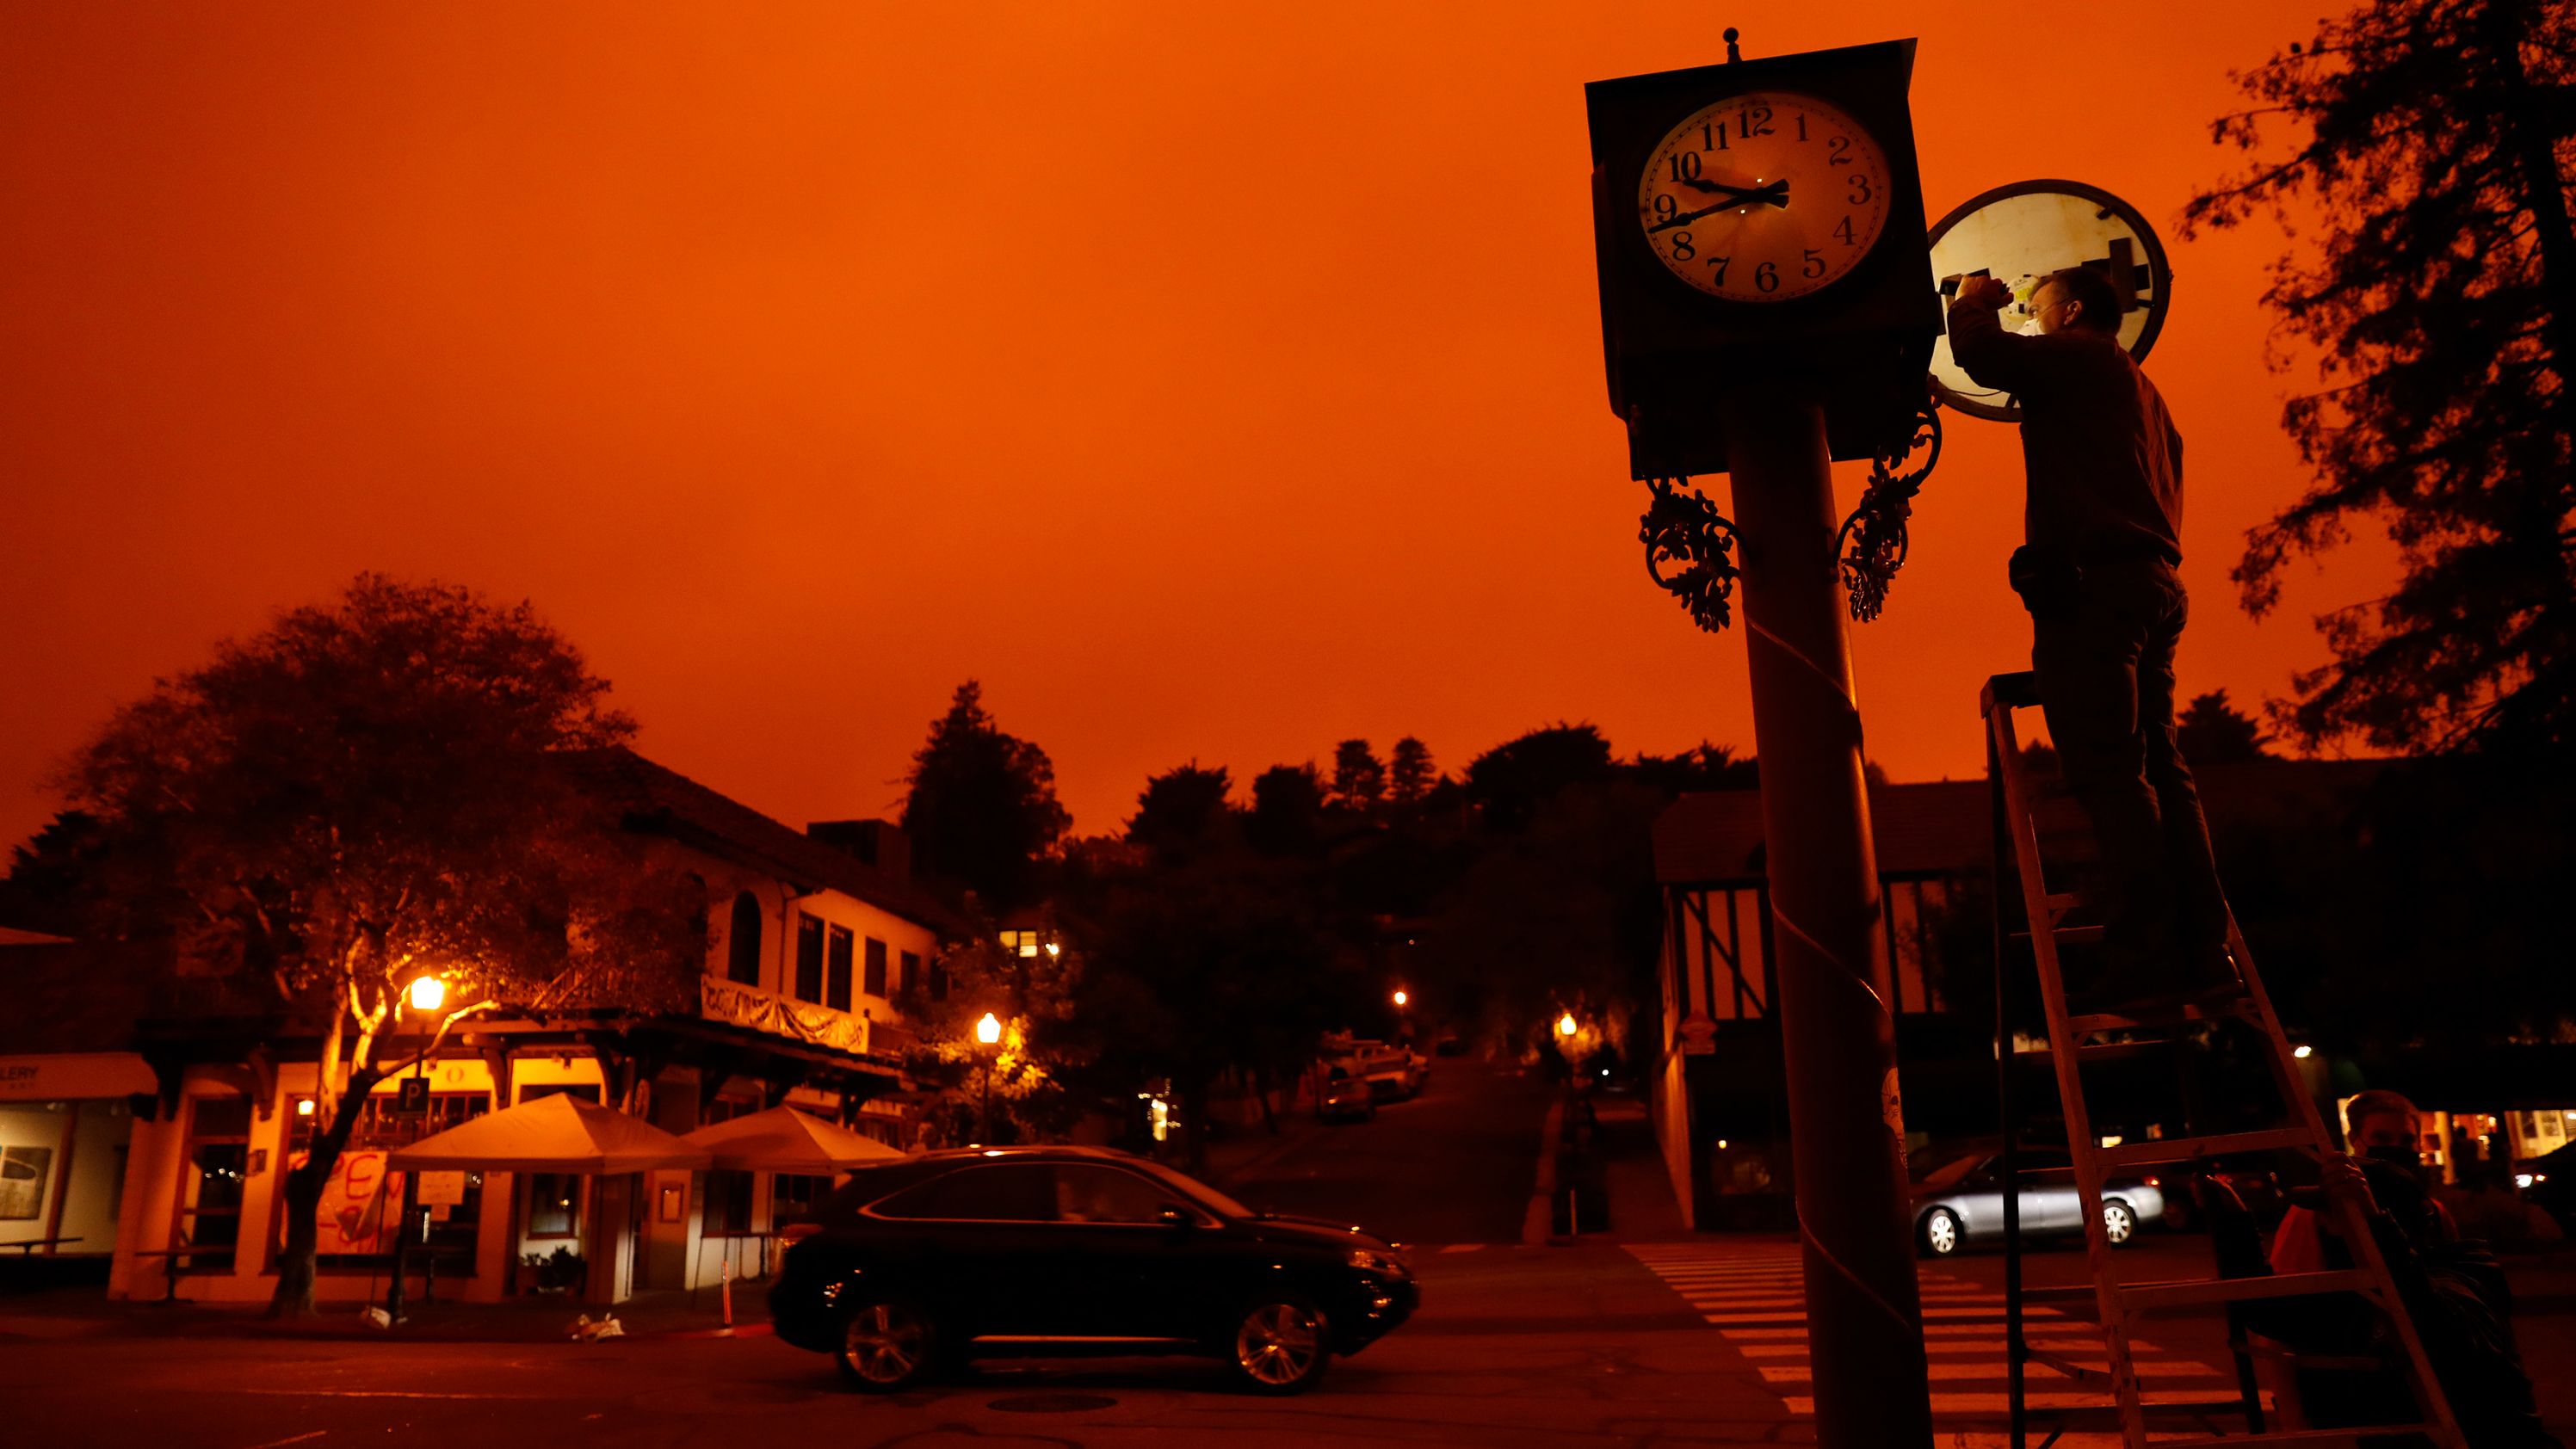 Bejhan Razi, a senior building inspector in Mill Valley, California, checks out repairs on a lamp-post clock as the sky is illuminated by nearby wildfires.